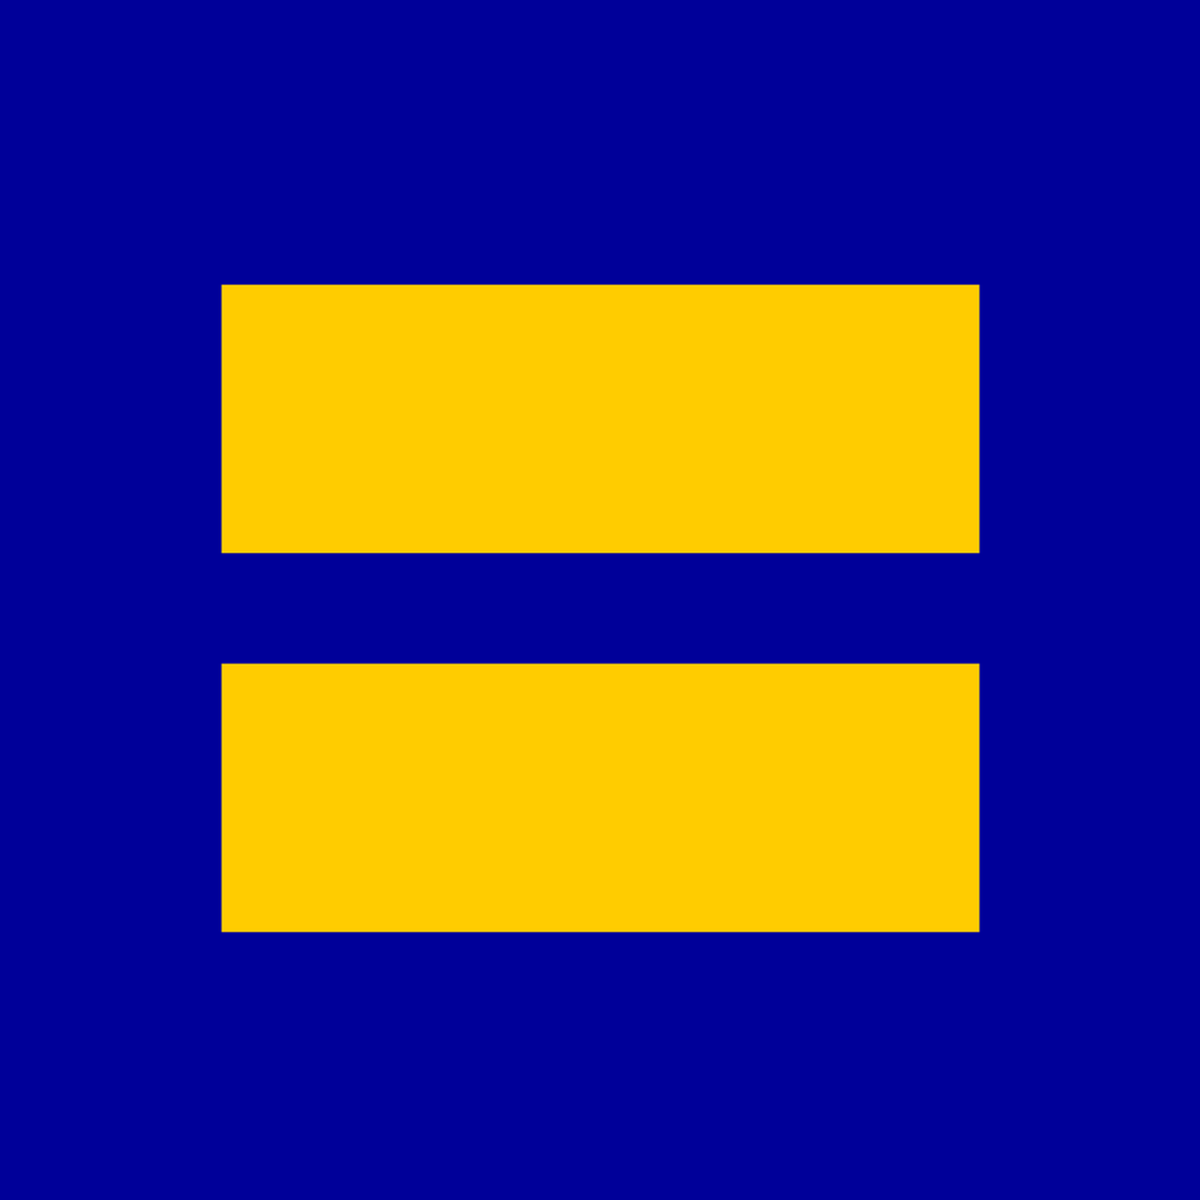 What The Equality Symbol Means